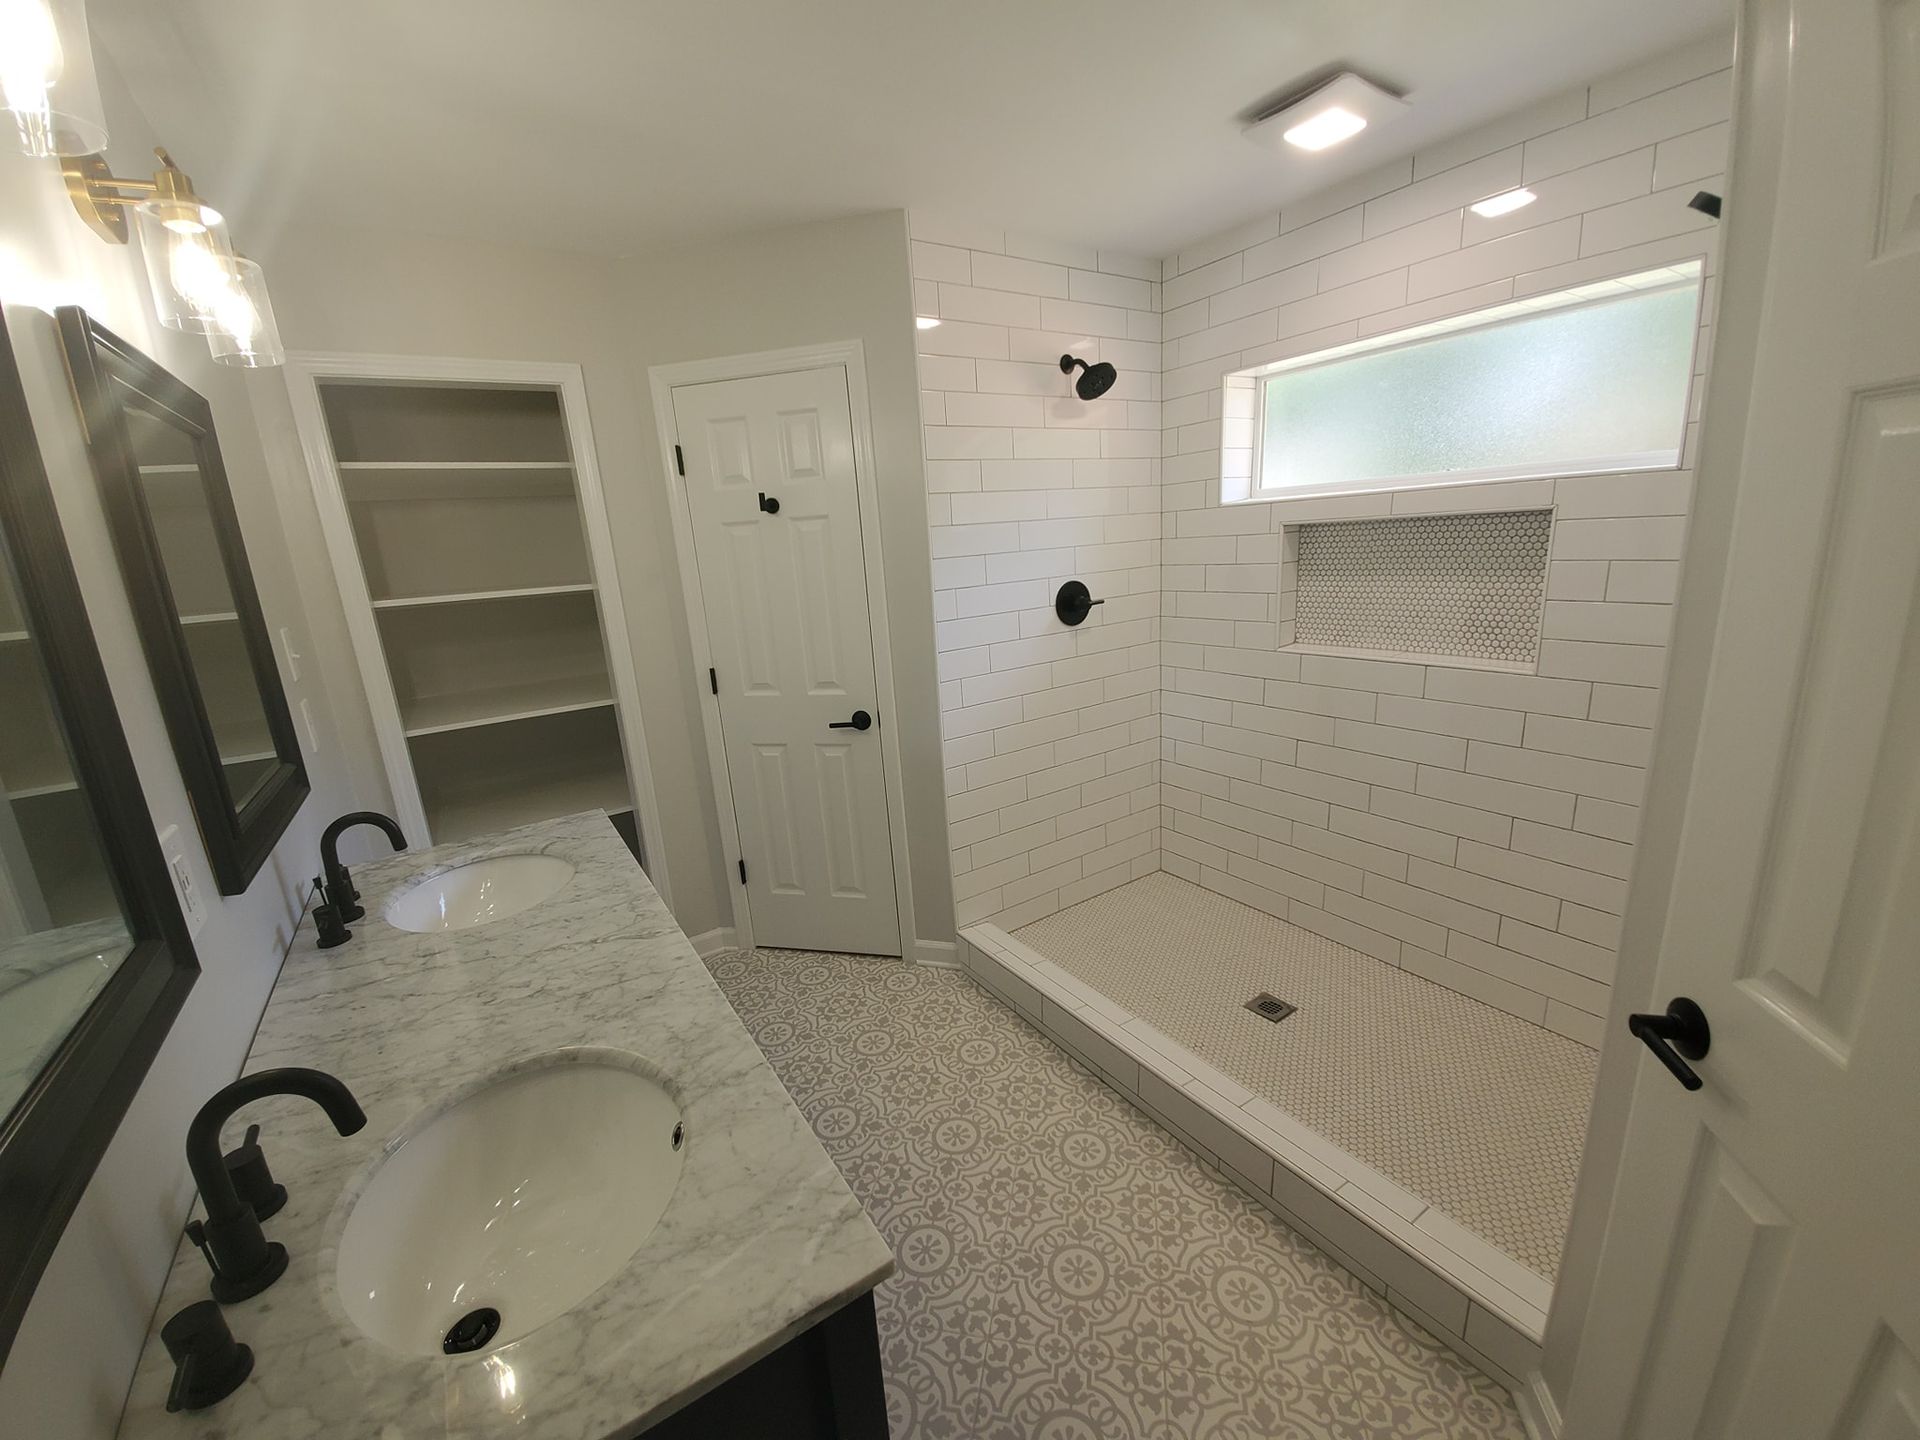 A bathroom with a sink and a walk in shower.